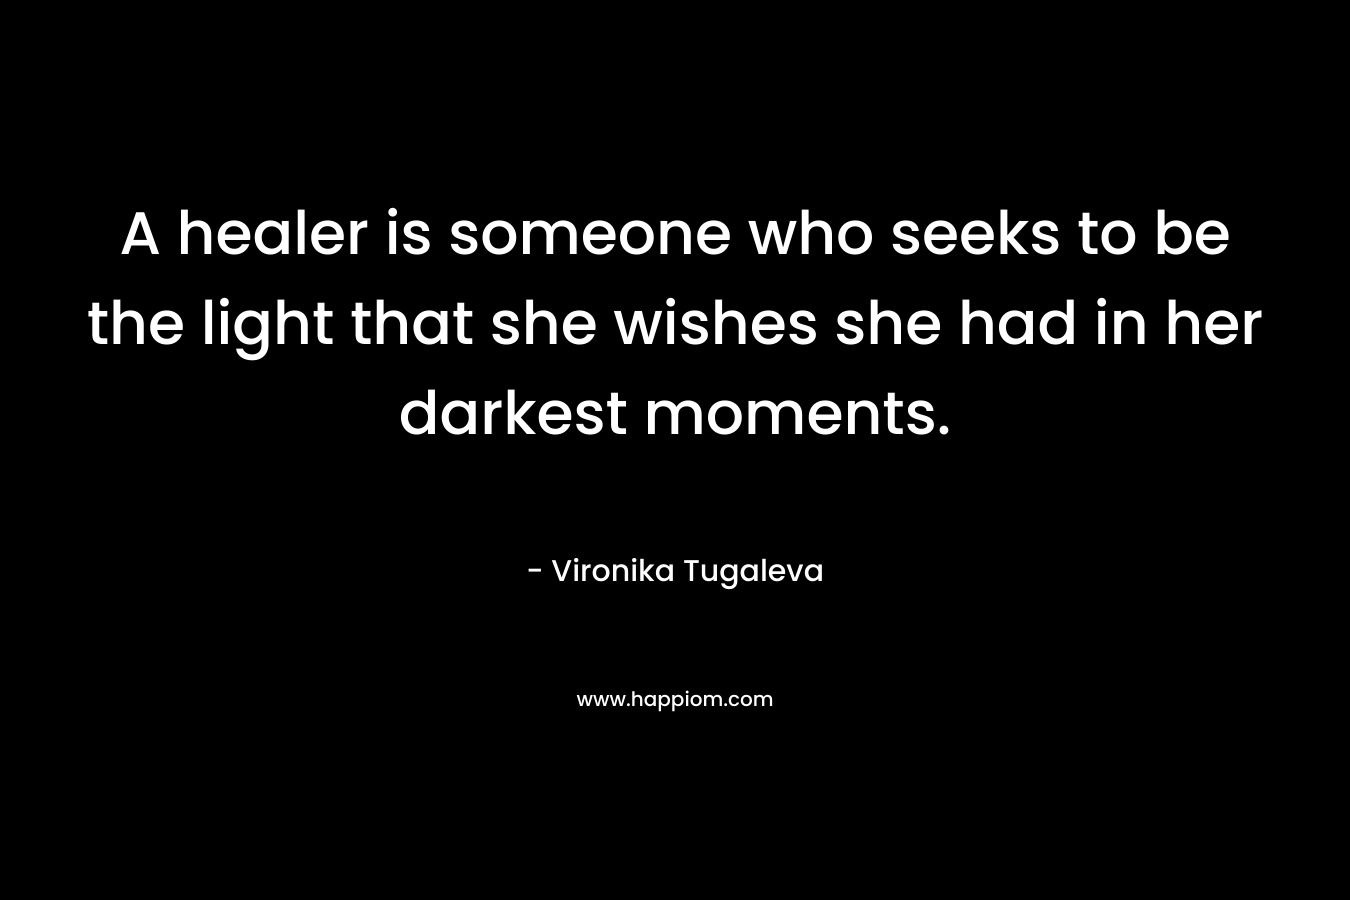 A healer is someone who seeks to be the light that she wishes she had in her darkest moments. – Vironika Tugaleva